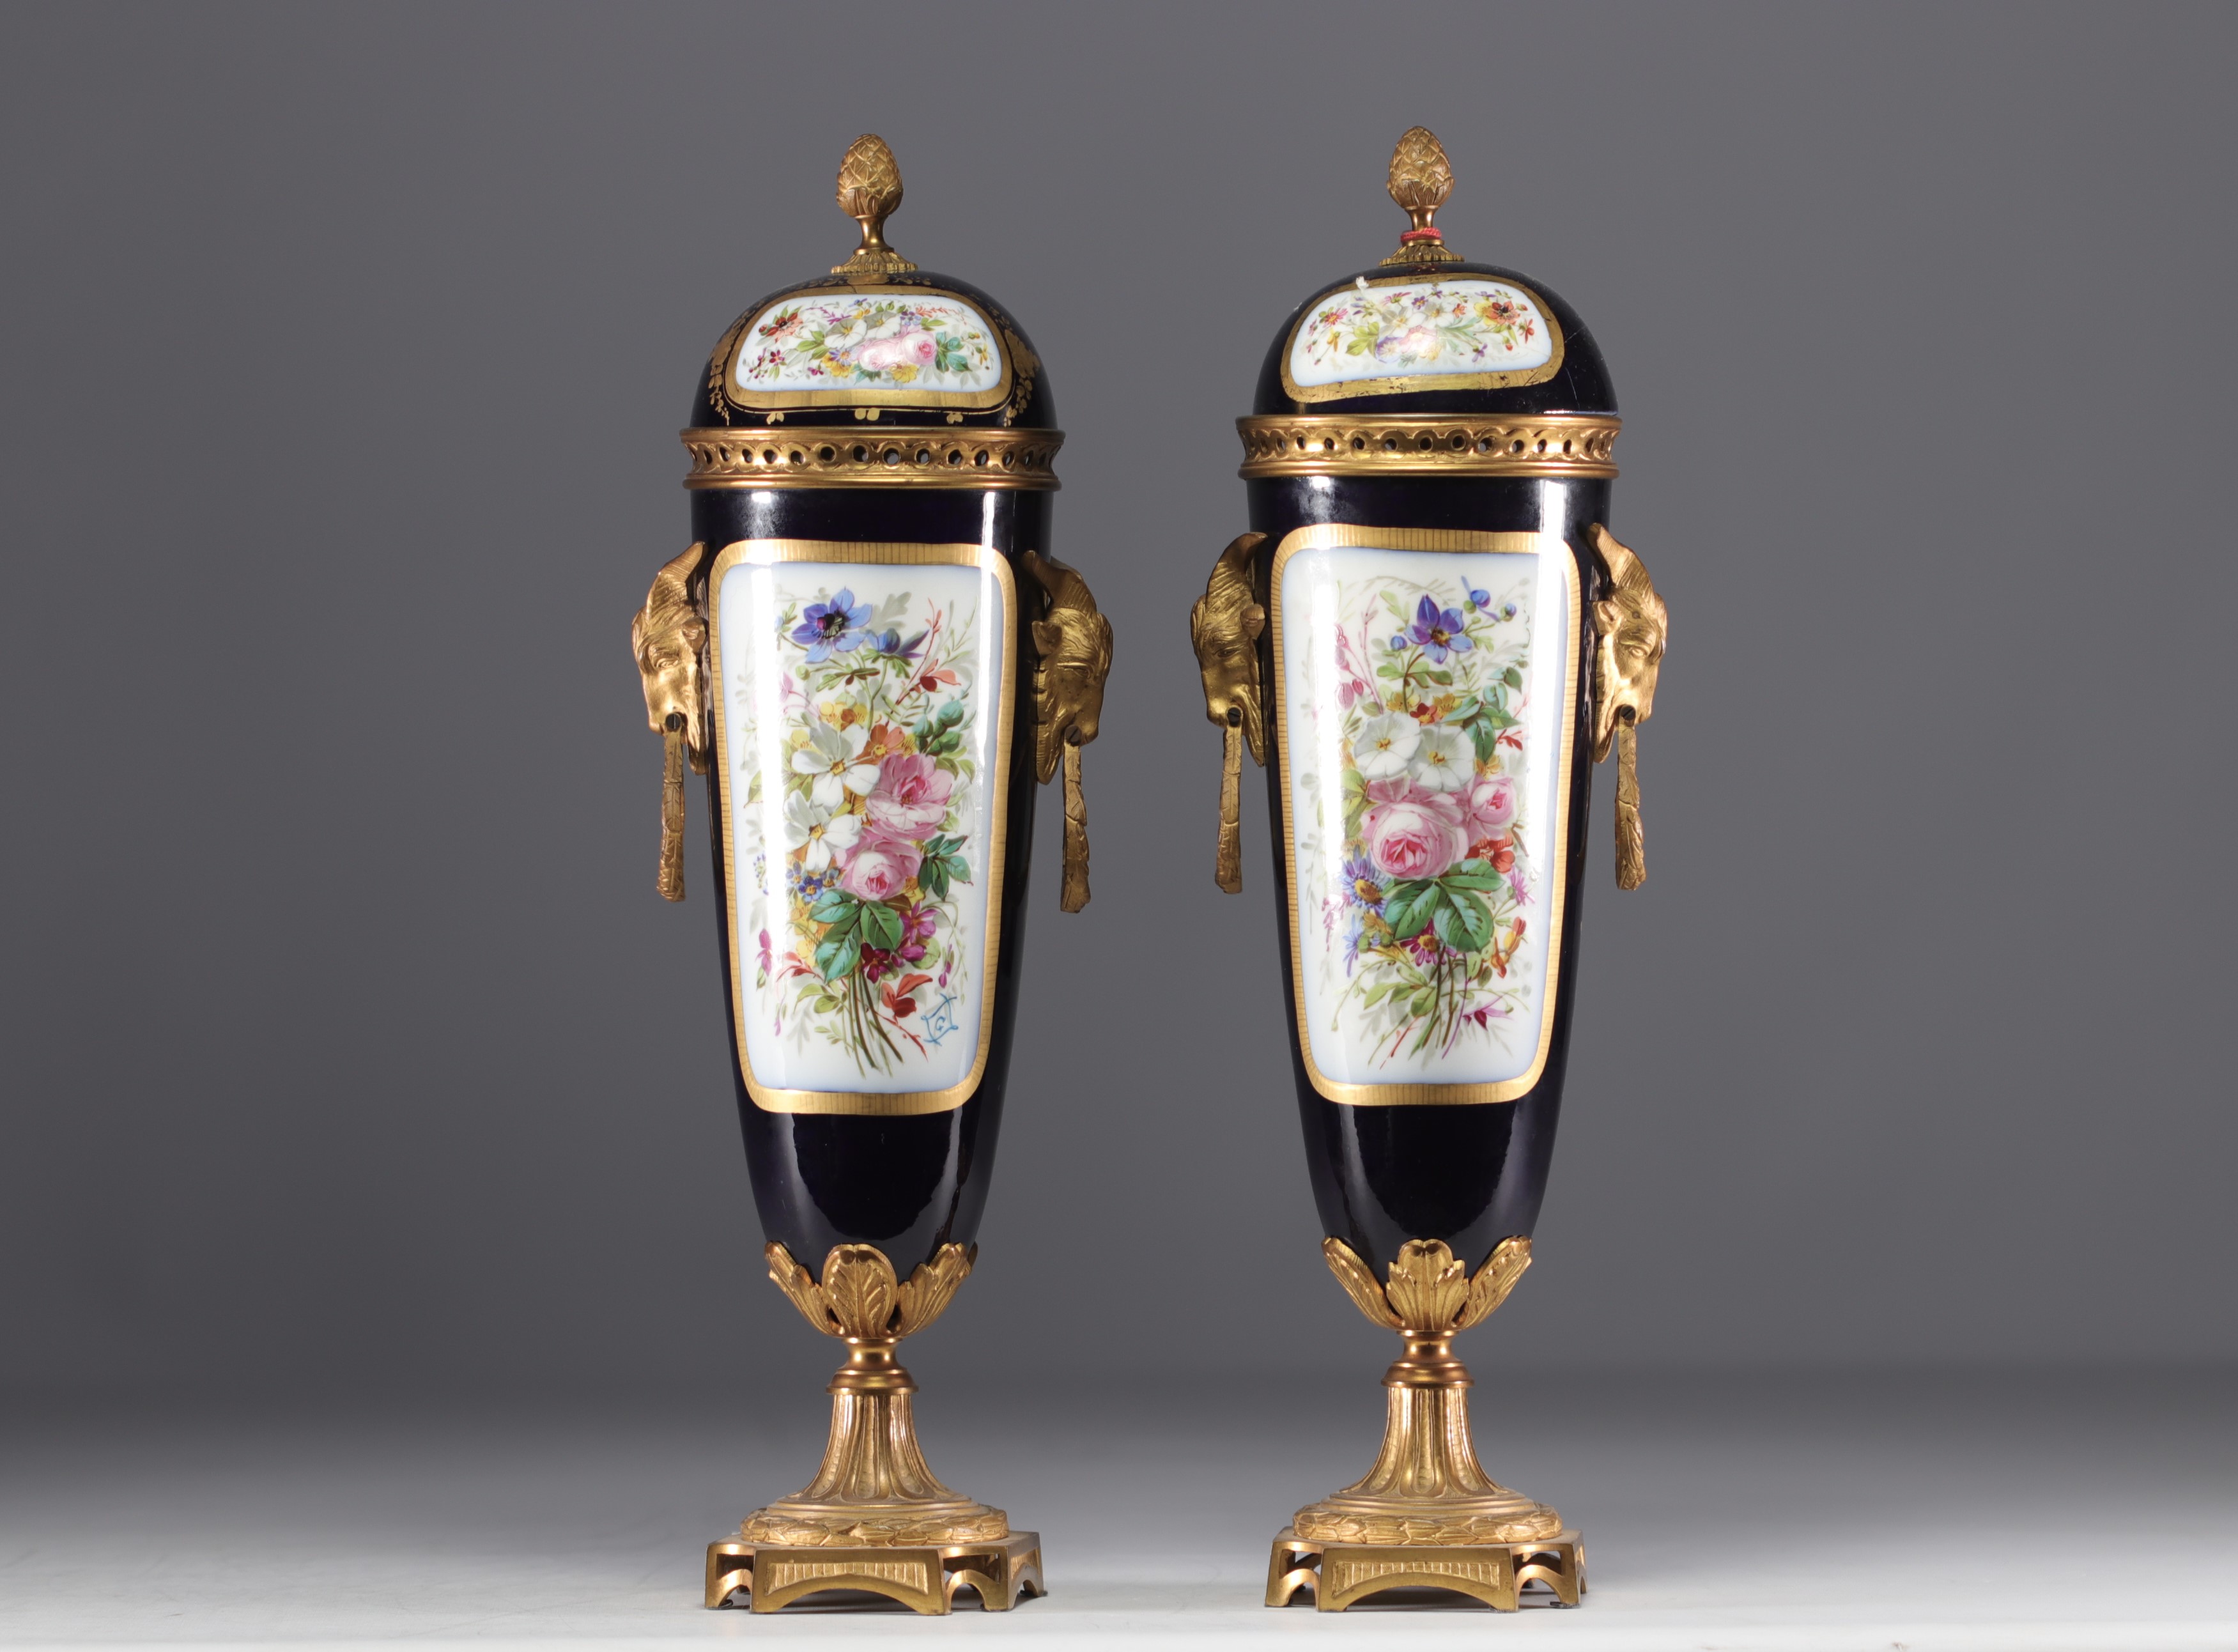 Sevres - Pair of bronze mounted porcelain covered cassolettes "Romantic scenes". - Image 4 of 4